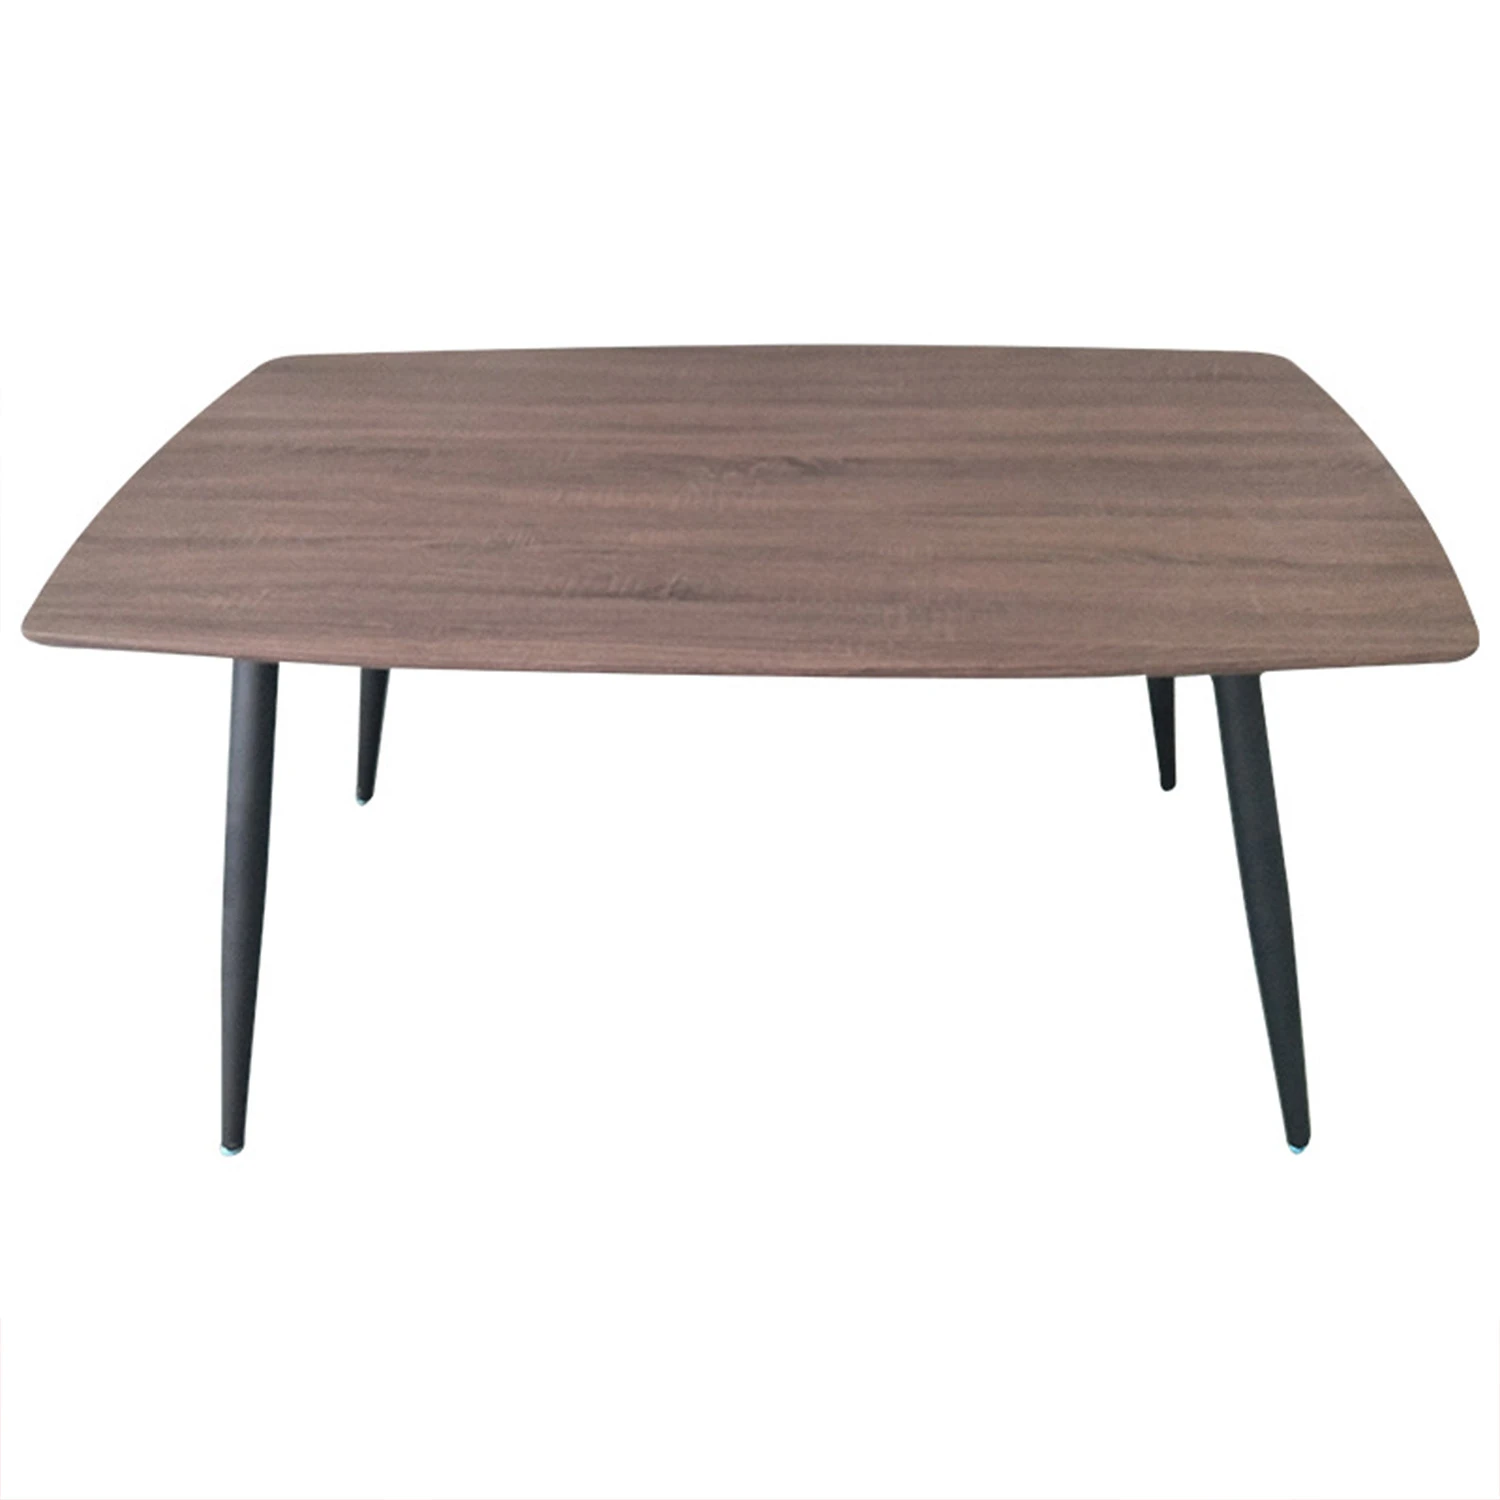 Desk Retractable Wood Table Dining Room Tables for home